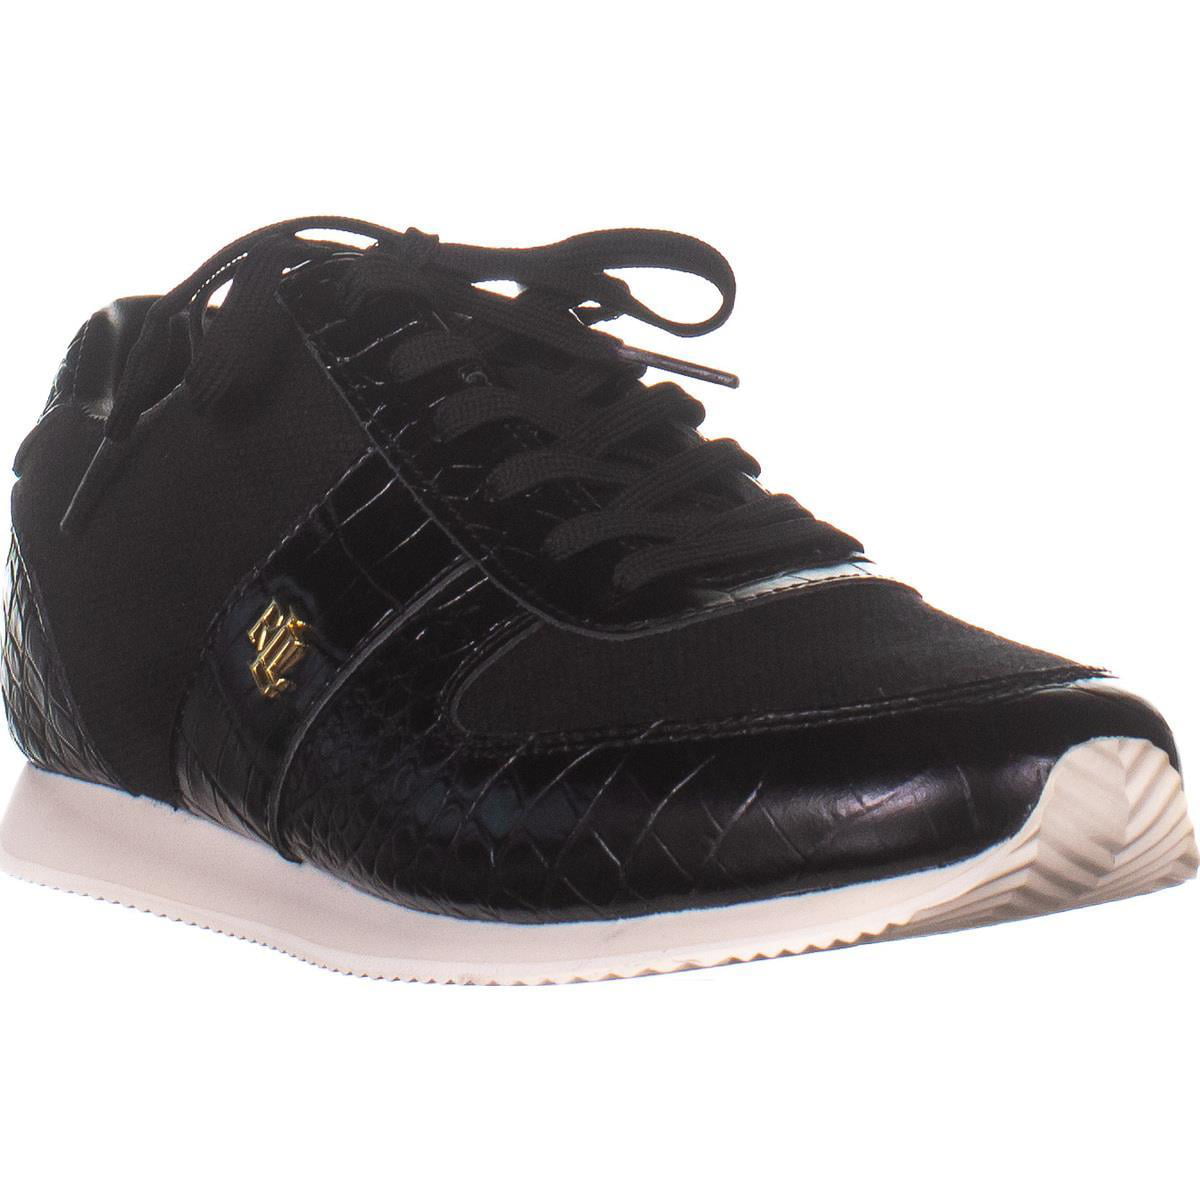 Lauren Ralph Lauren - Womens Lauren Ralph Lauren Cate III Lace Up ...